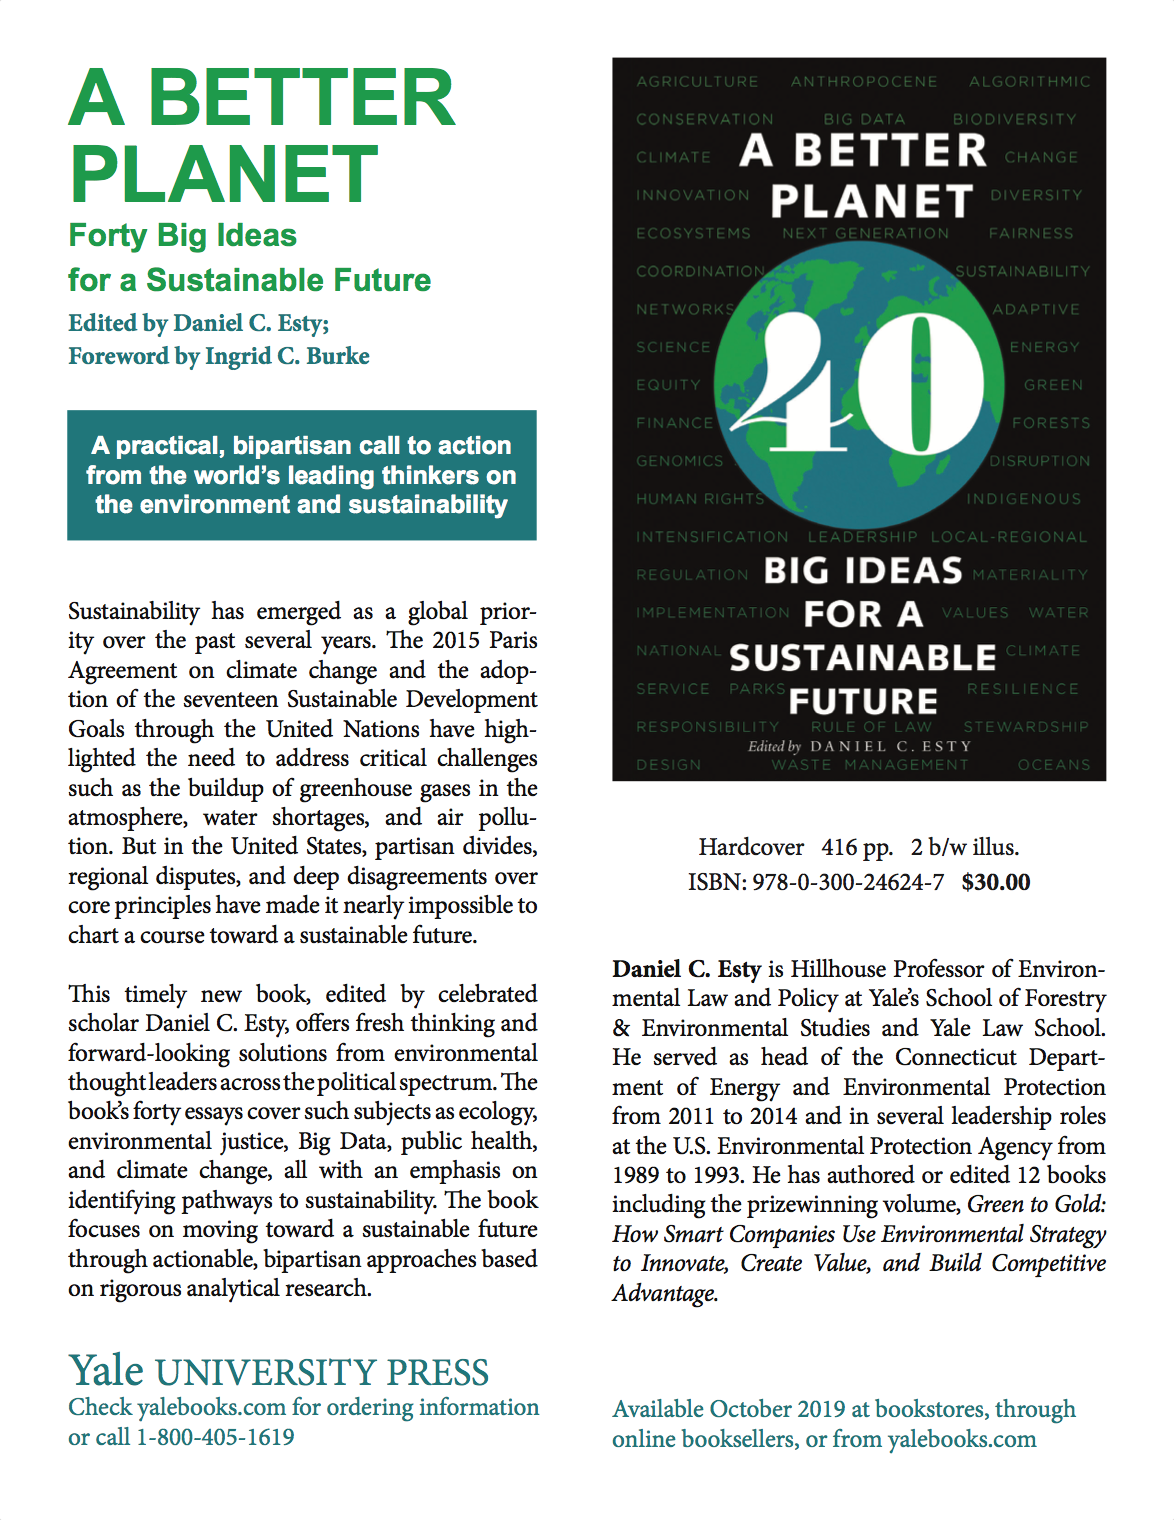 A Better Planet: Fourty Big Ideas for Sustainable Future